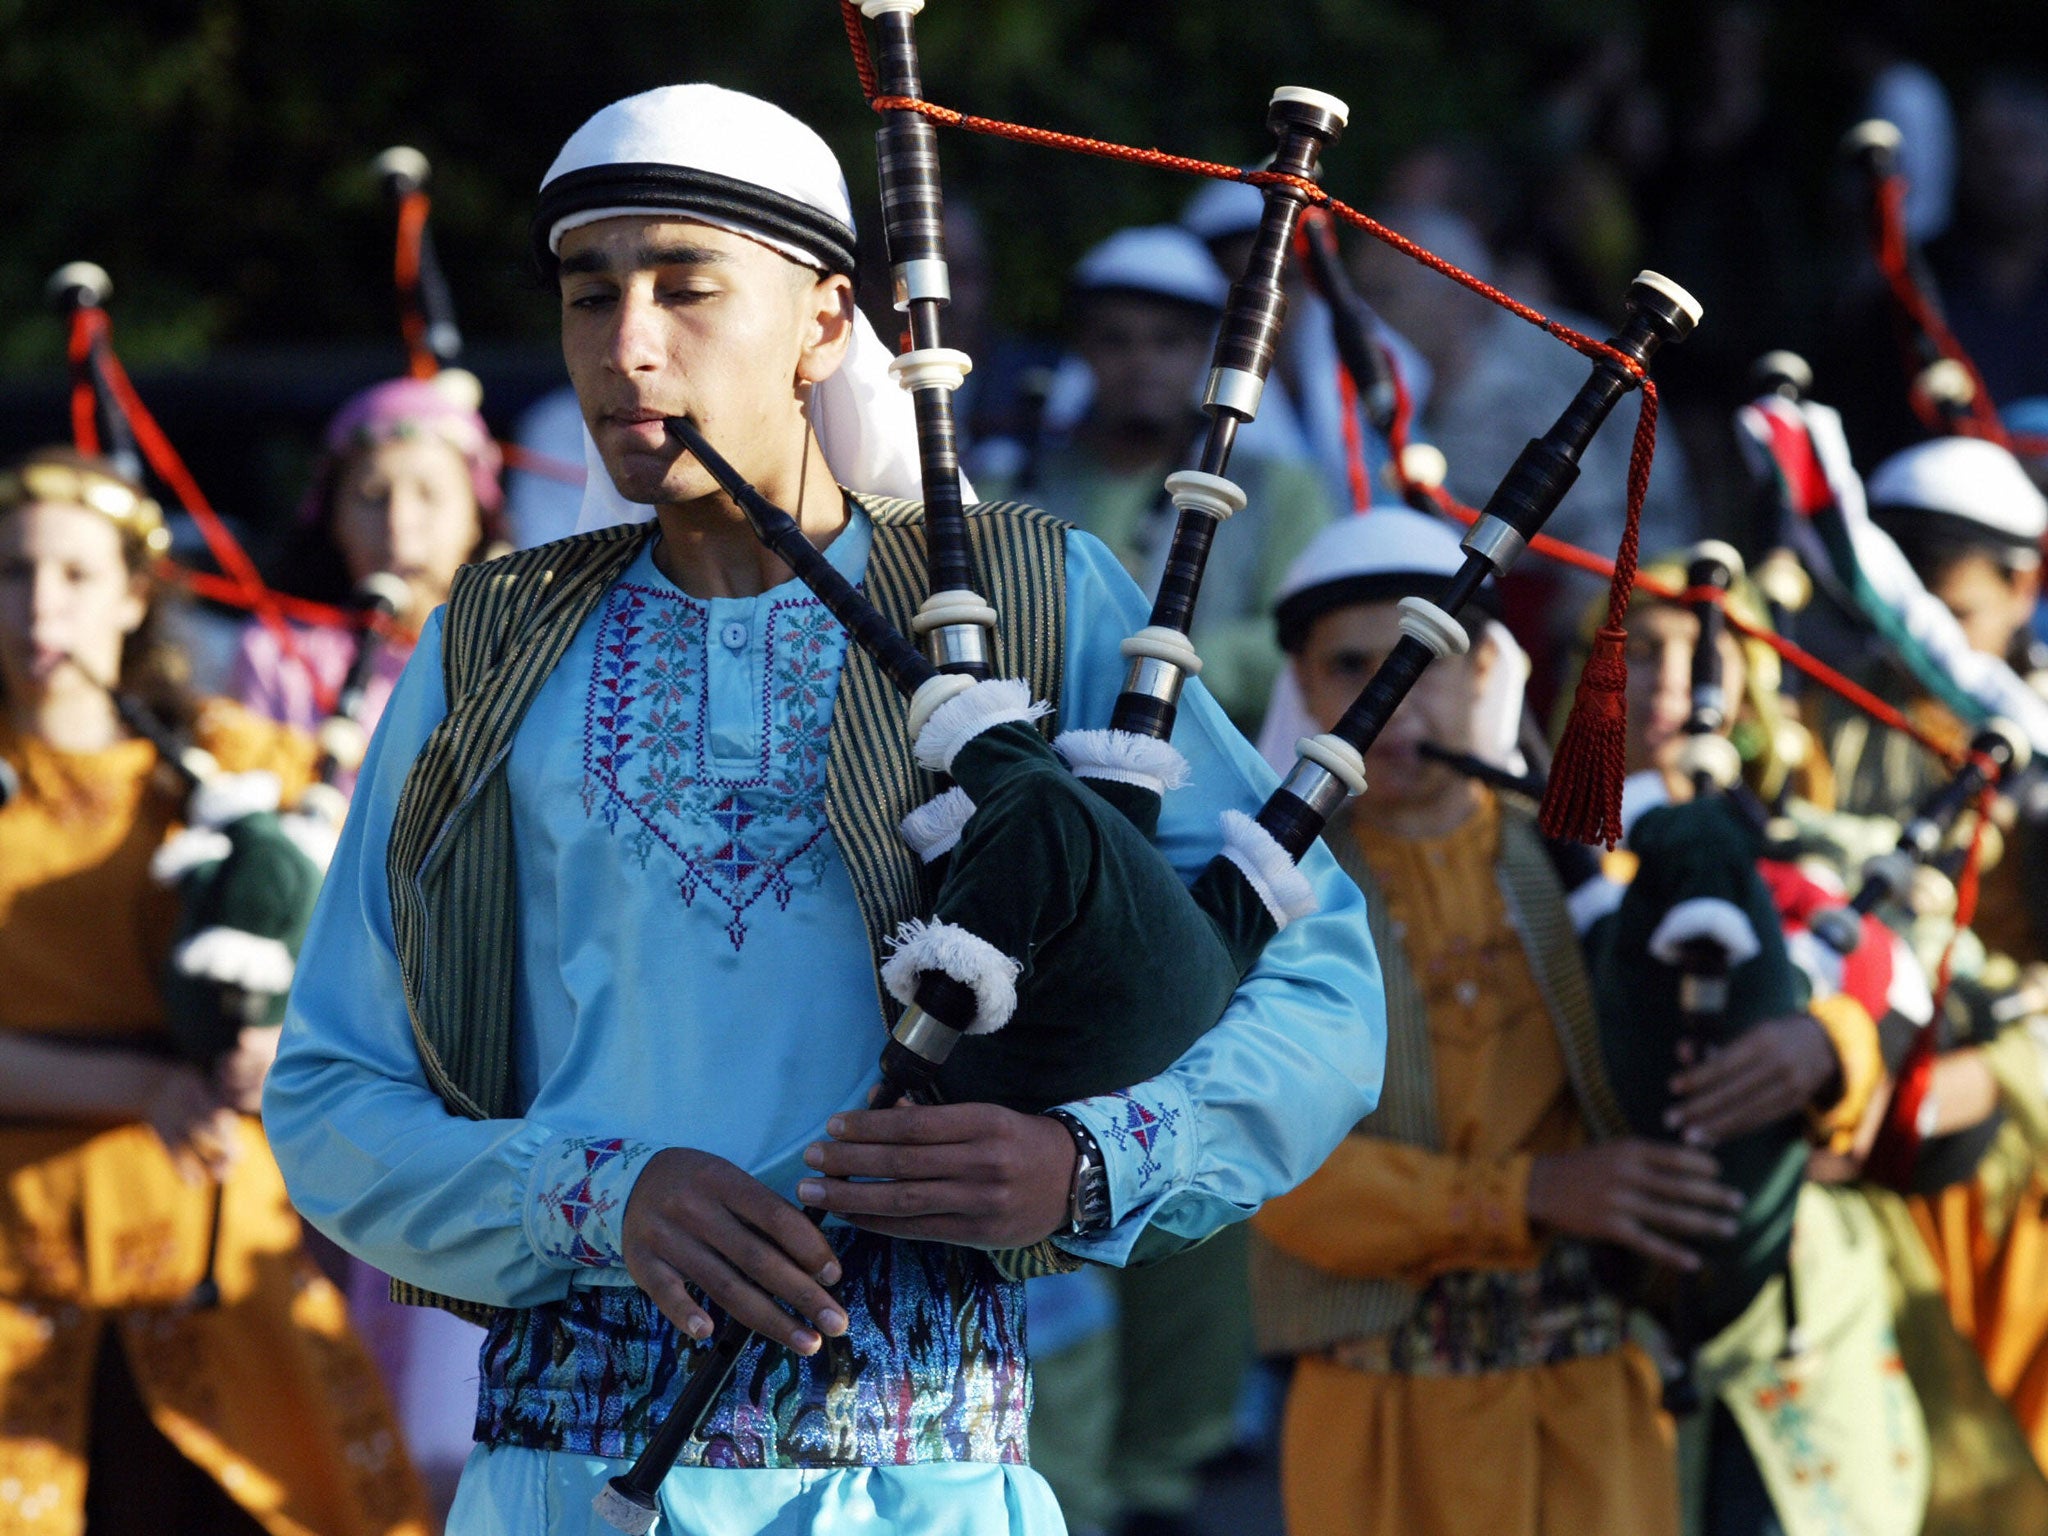 A member of the Palestinian group Guirab plays the Highland pipes